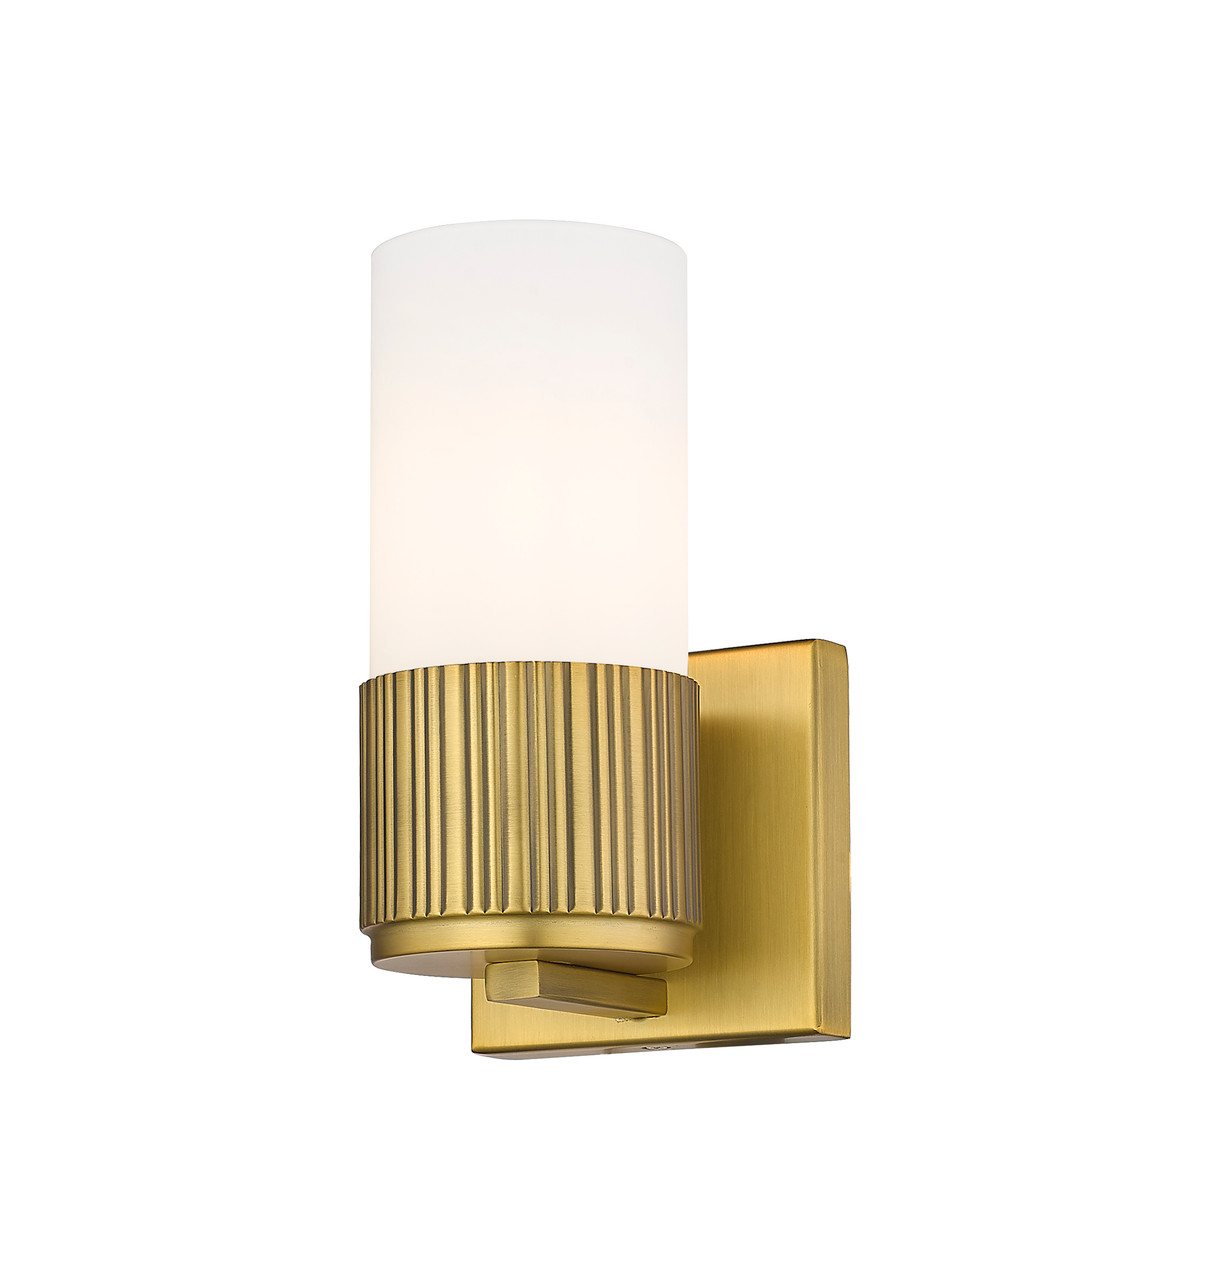 INNOVATIONS 428-1W-BB-G428-7WH Bolivar 1 5 inch Sconce Brushed Brass